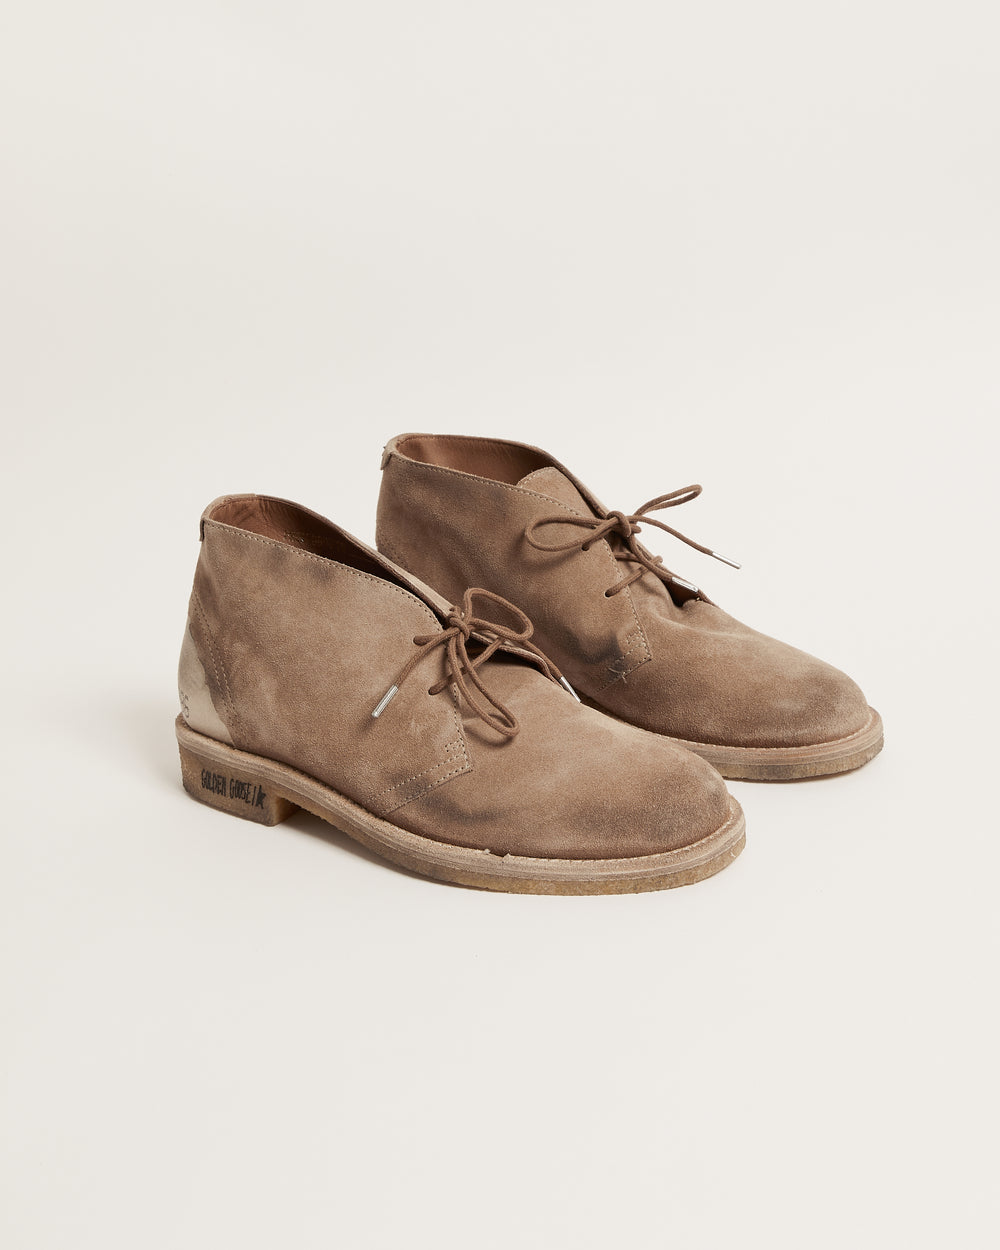 Desert Ankle Boots in Brown Caramel Suede